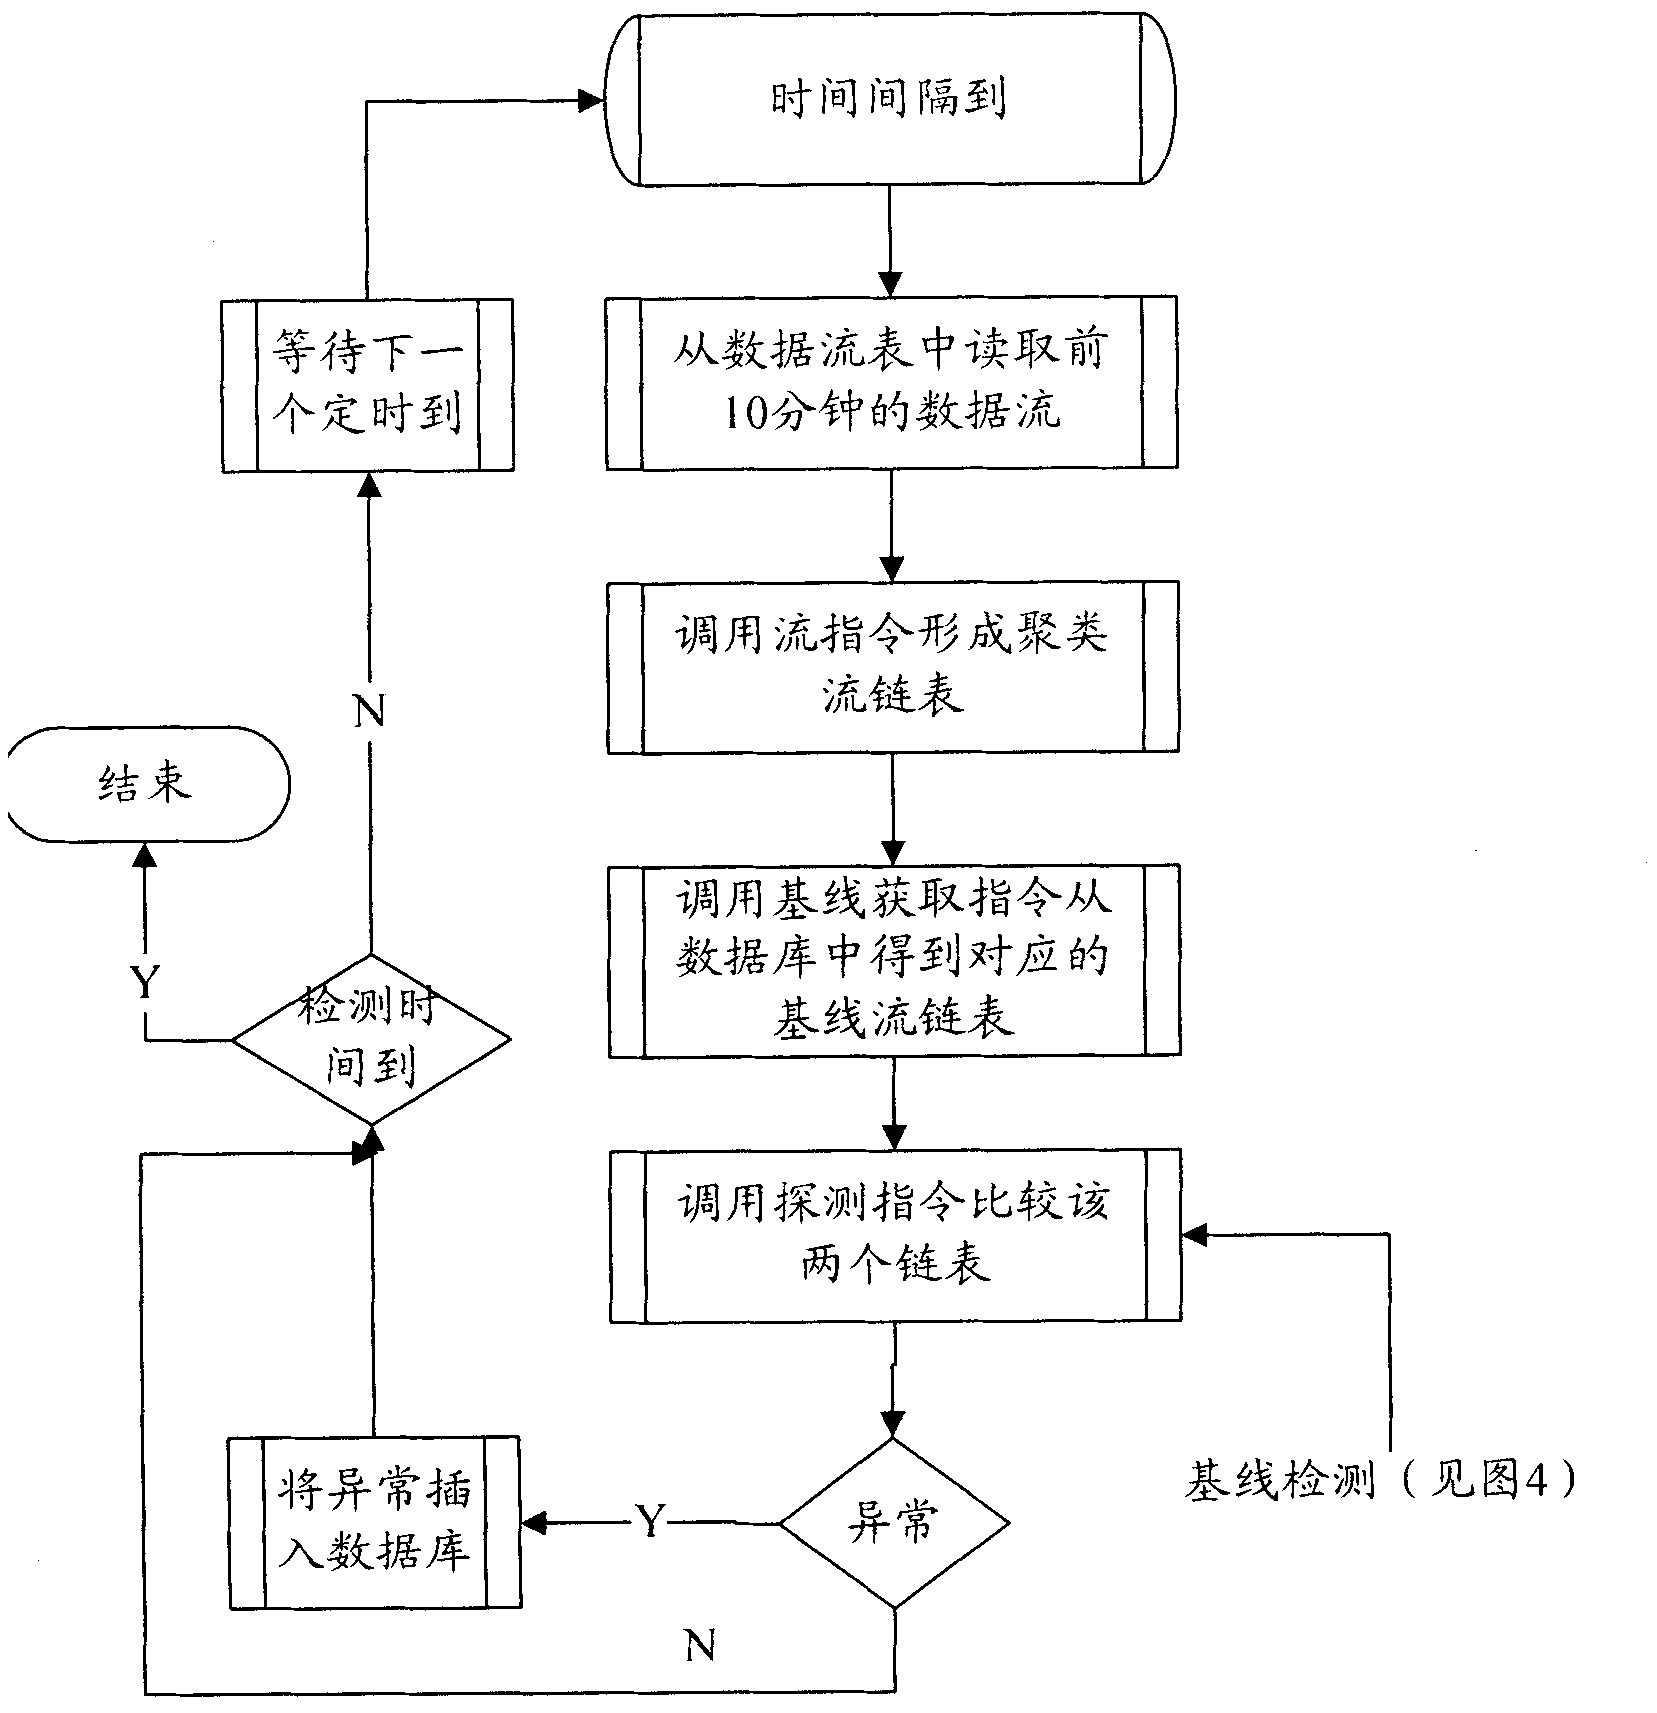 Device and method for detecting network access abnormality based on data stream behavior analysis